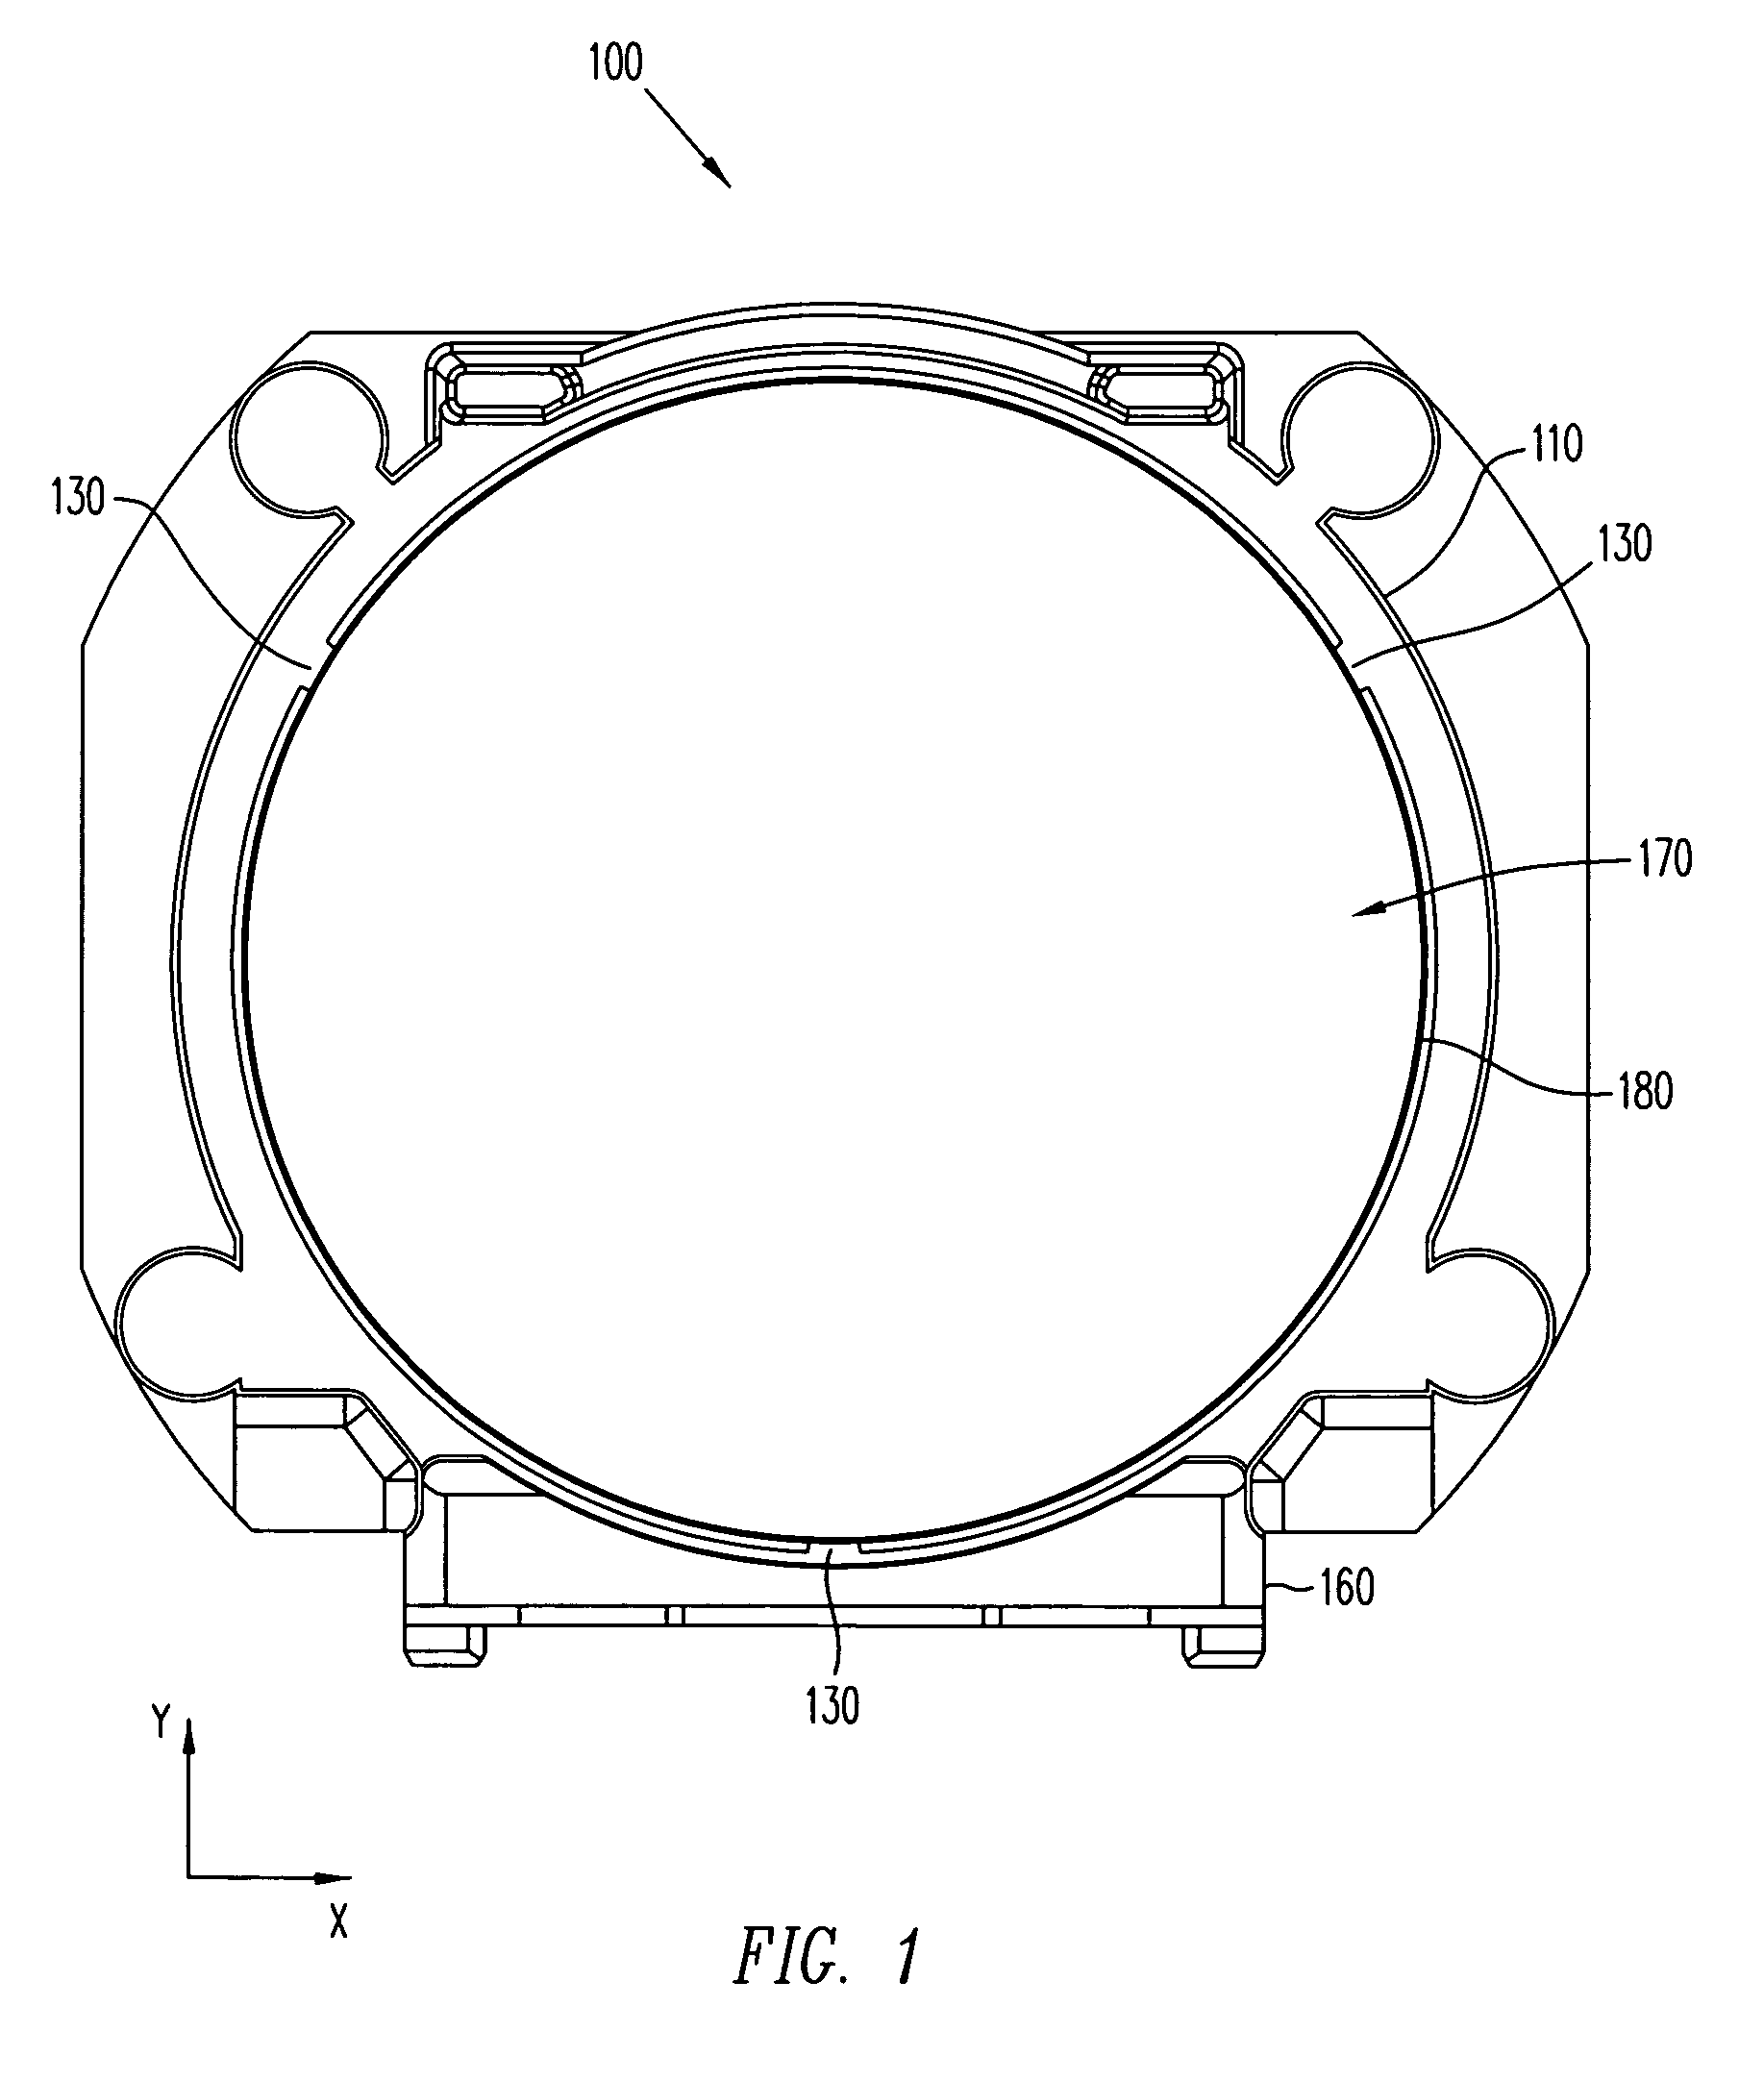 Lens positioning systems and methods